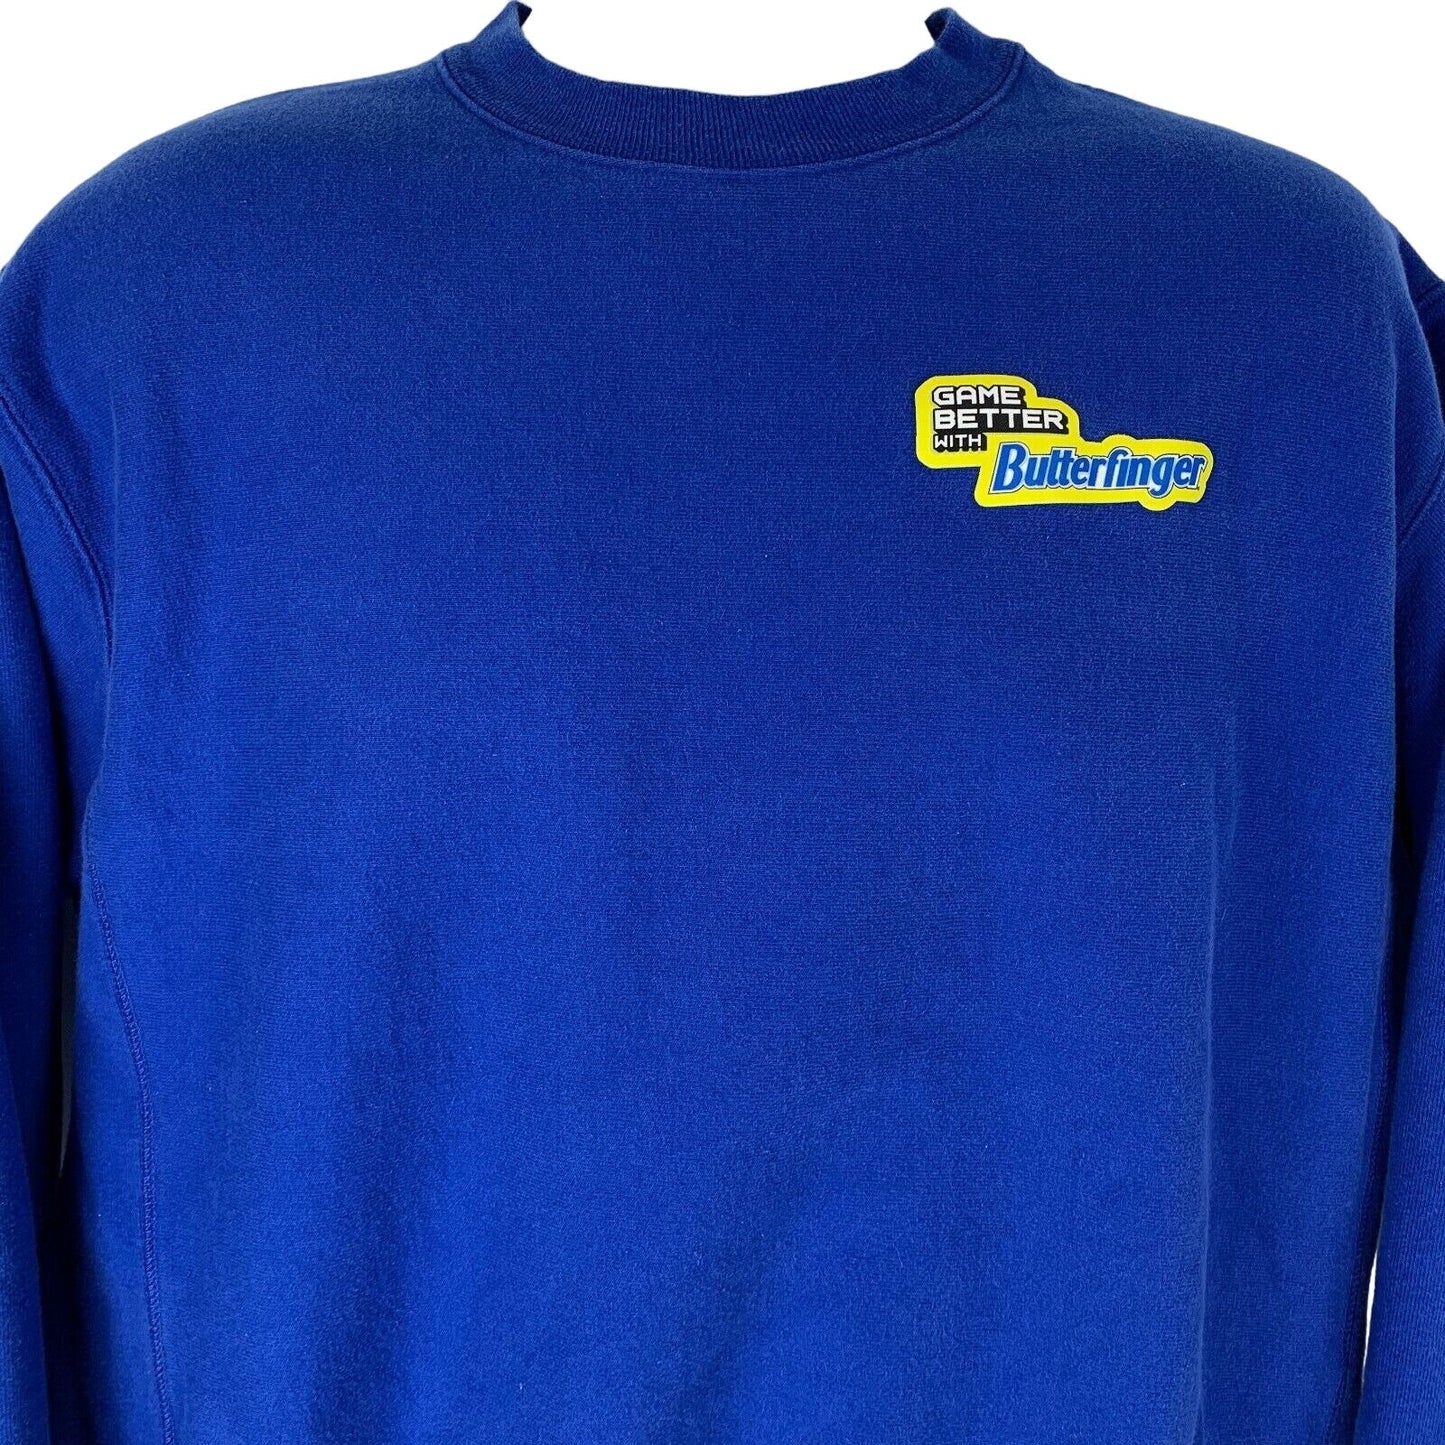 Champion Game Better With Butterfinger Sweatshirt Halo Reverse Weave Crew Large